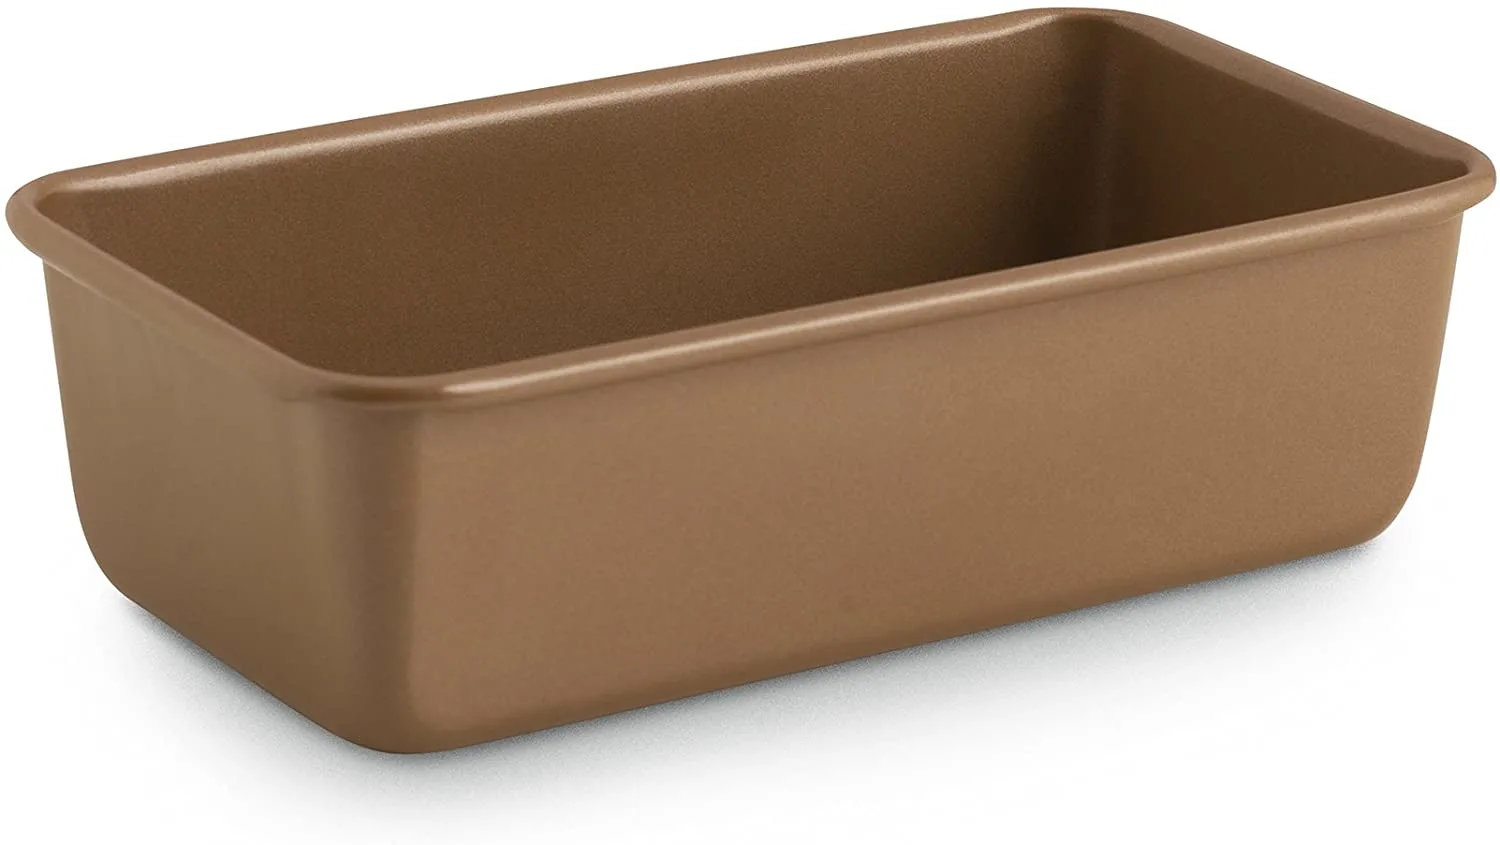 Calphalon Nonstick Bakeware, Loaf Pan, 5 inch by 8 inch

